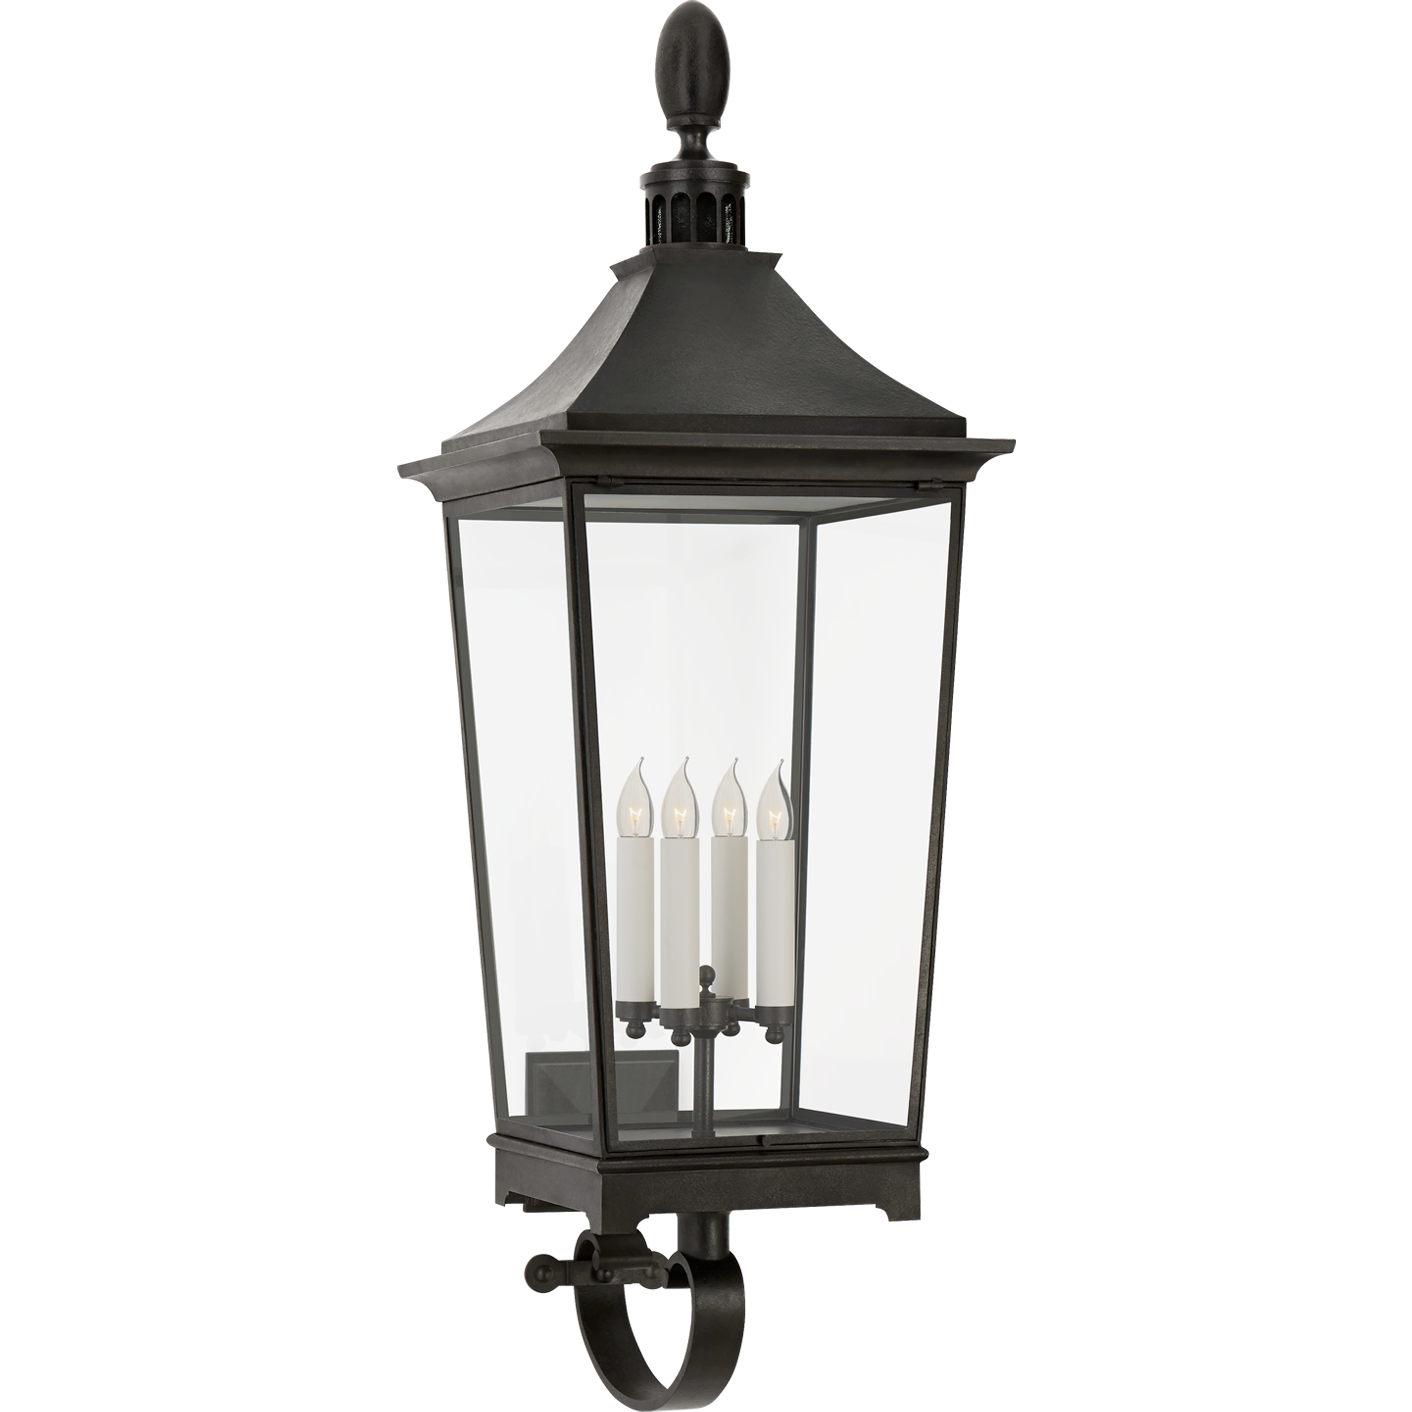 Rosedale Classic Large Tall Bracketed Wall Lantern